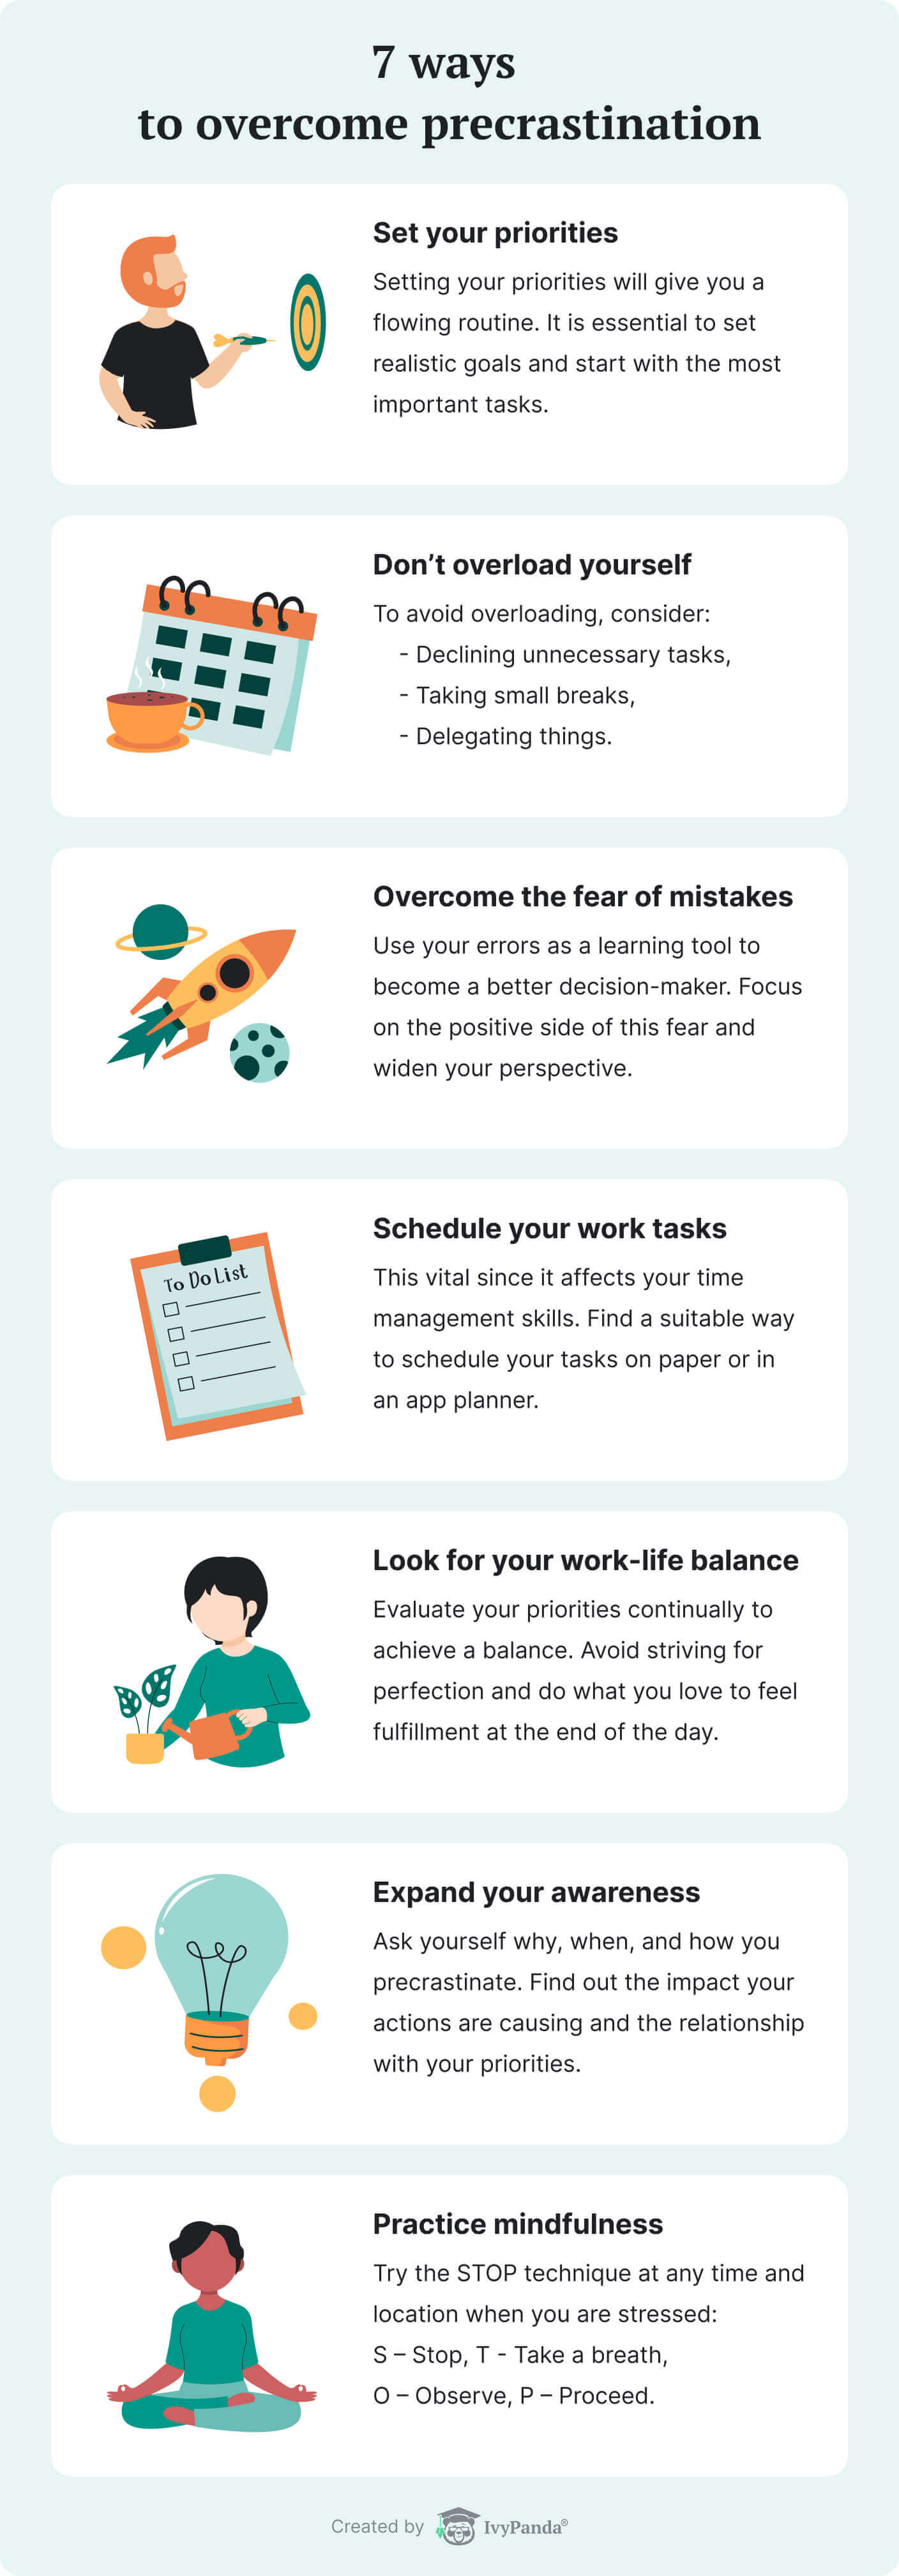 The infographic lists the tips that will help one overcome precrastination.